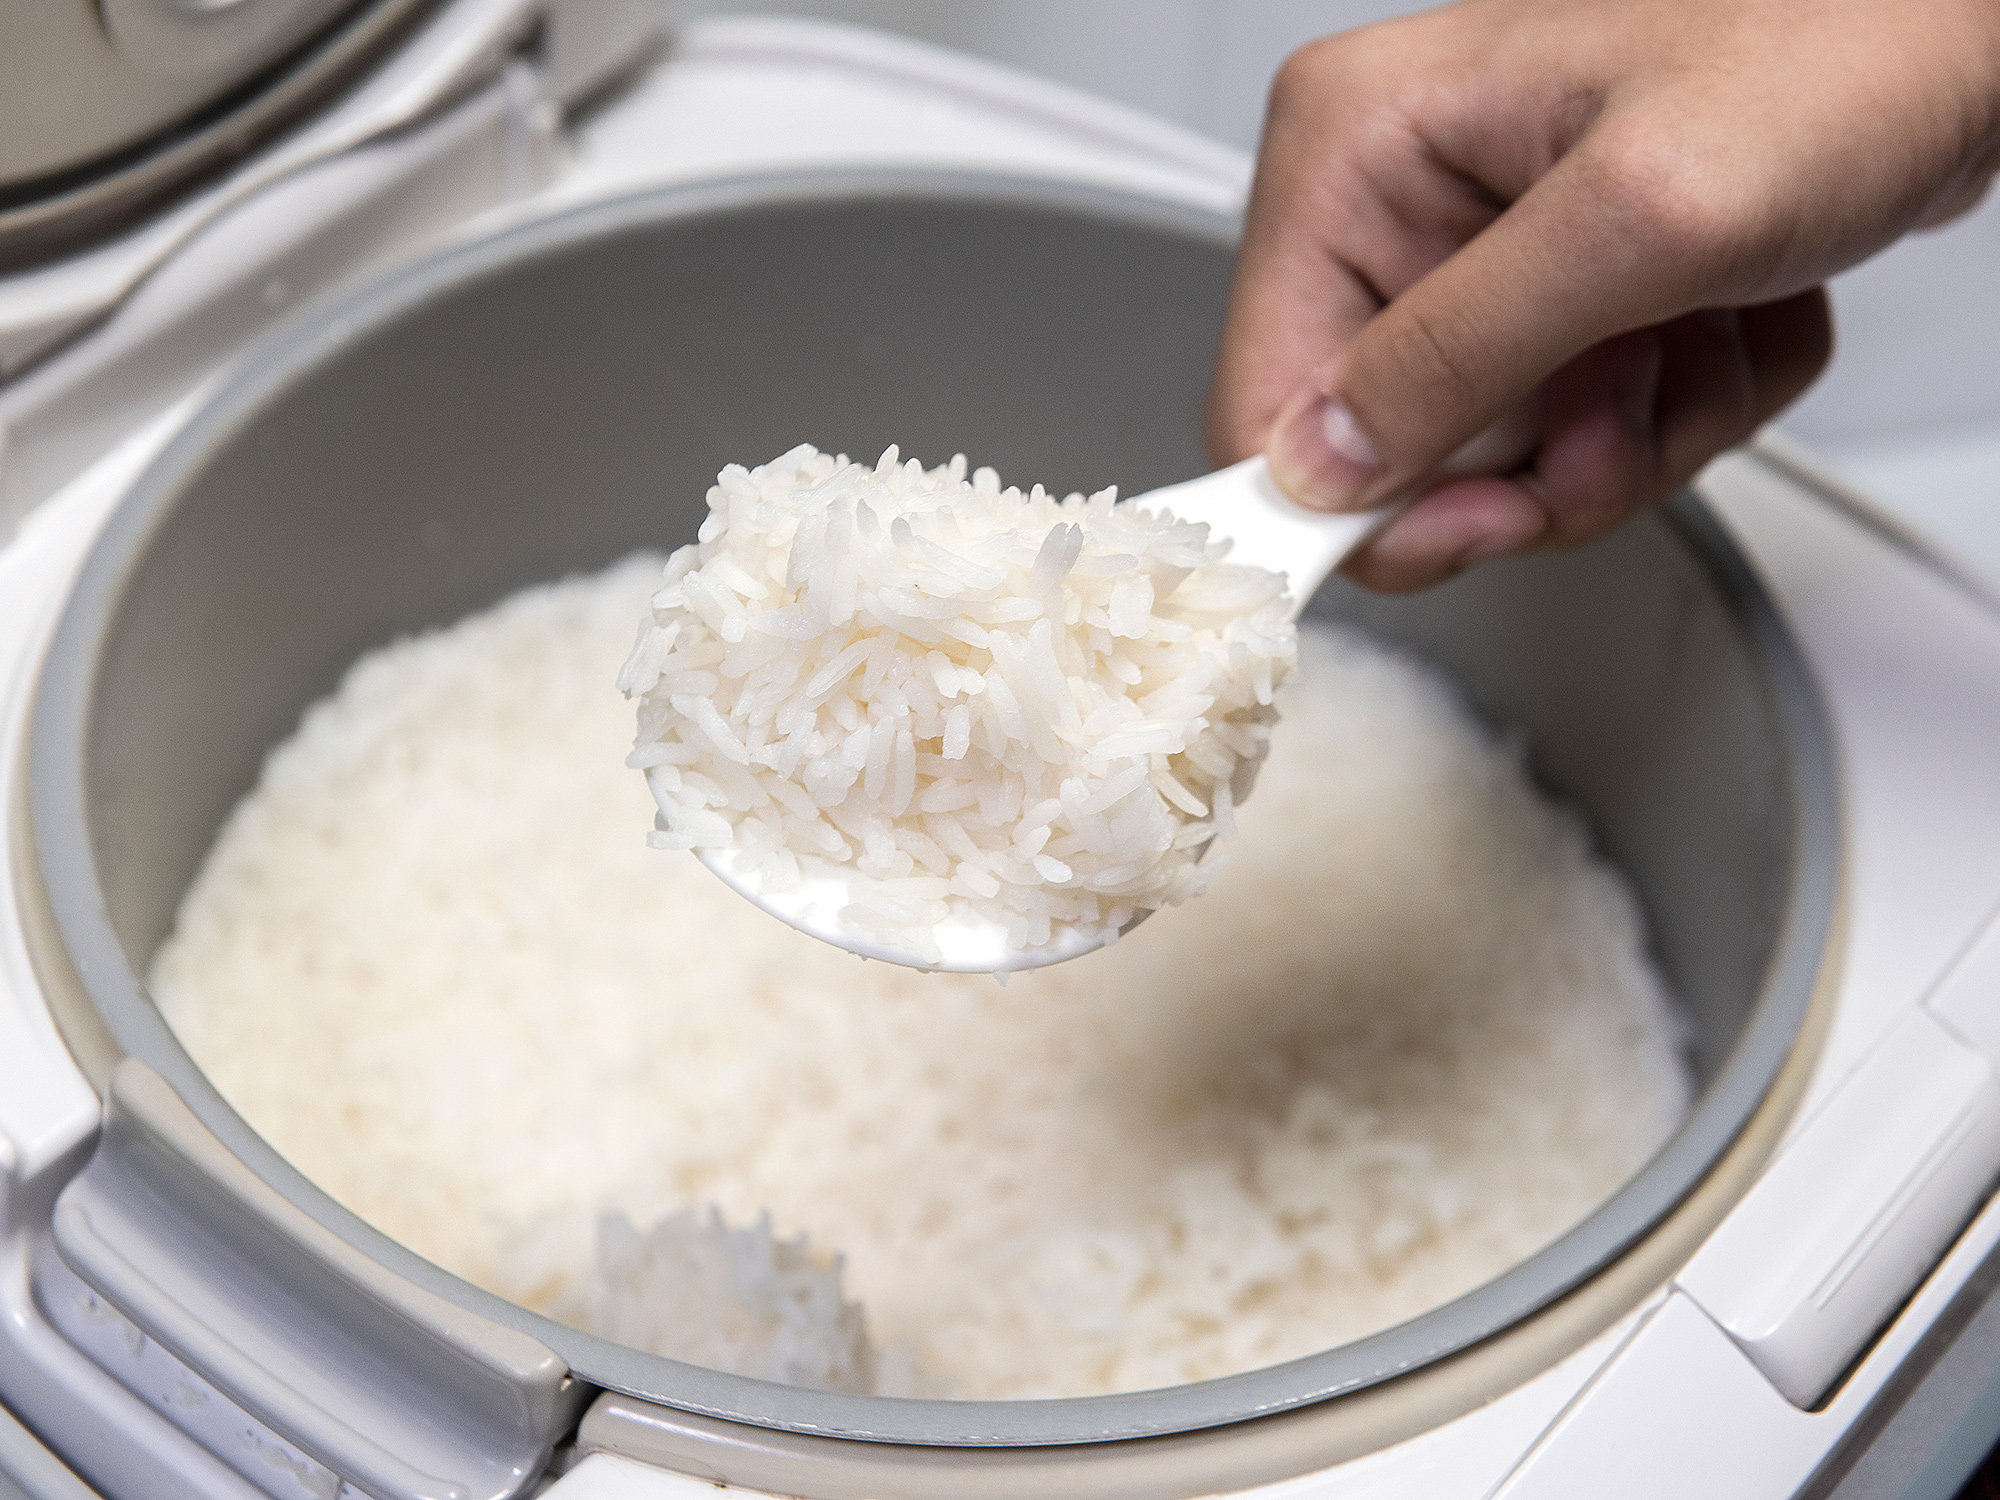 Rice Cookers: An Underappreciated Tech Triumph - Bloomberg